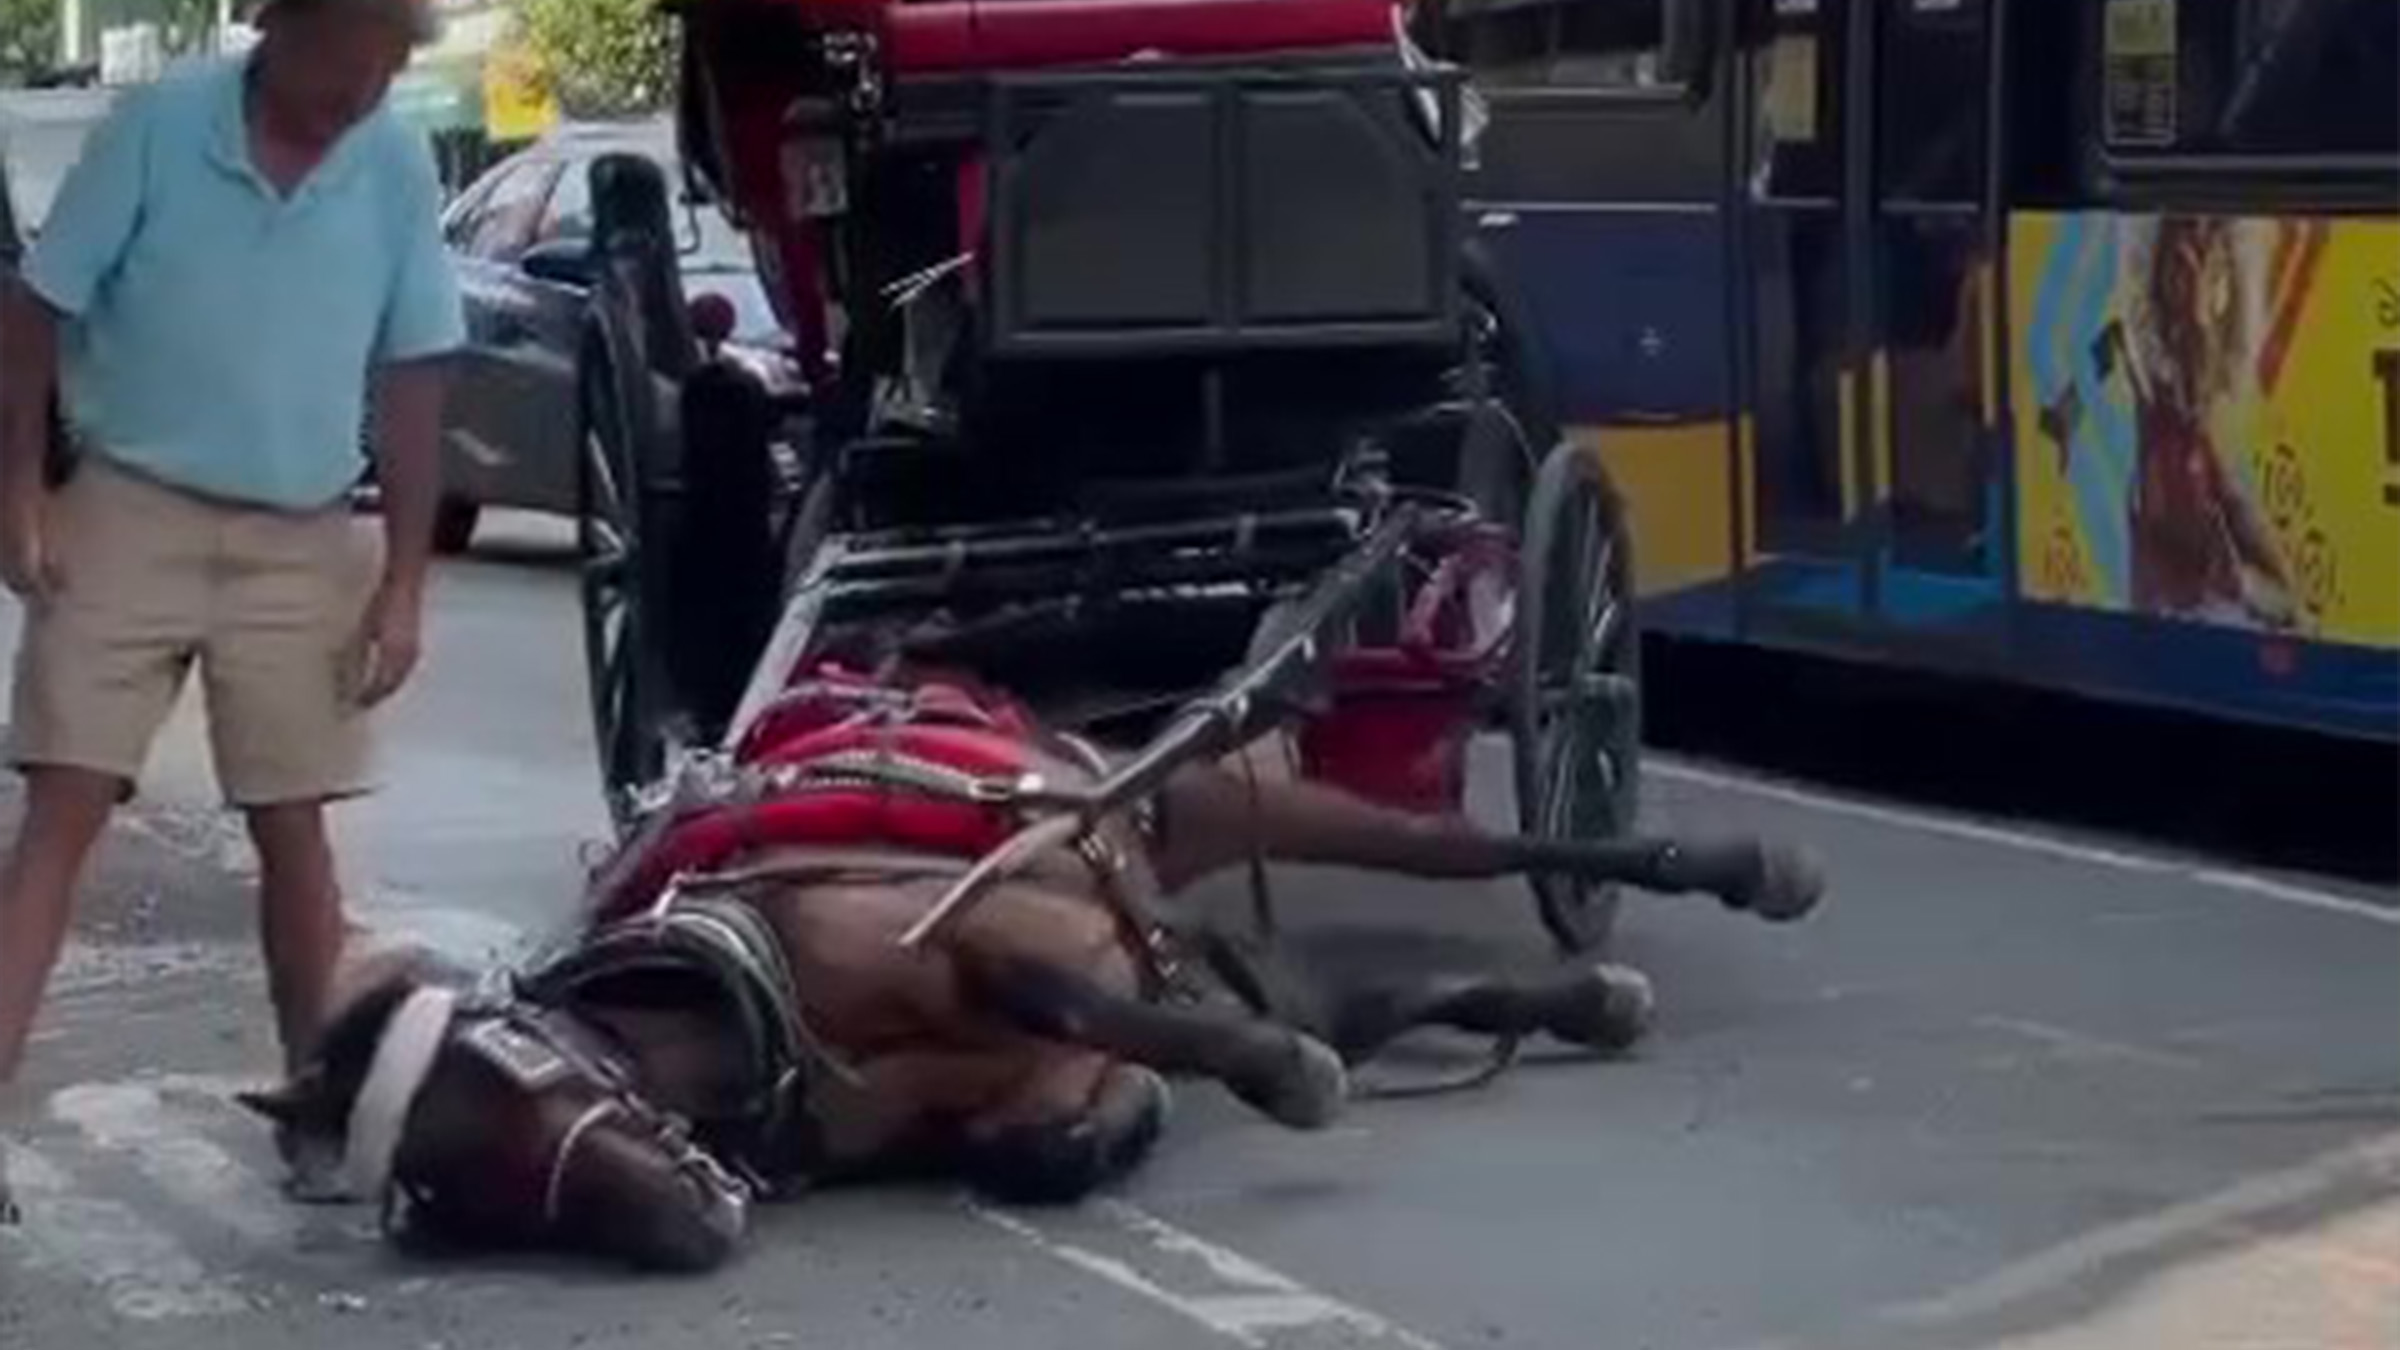 NYC launches new campaign to outlaw horse-drawn carriages as inhumane